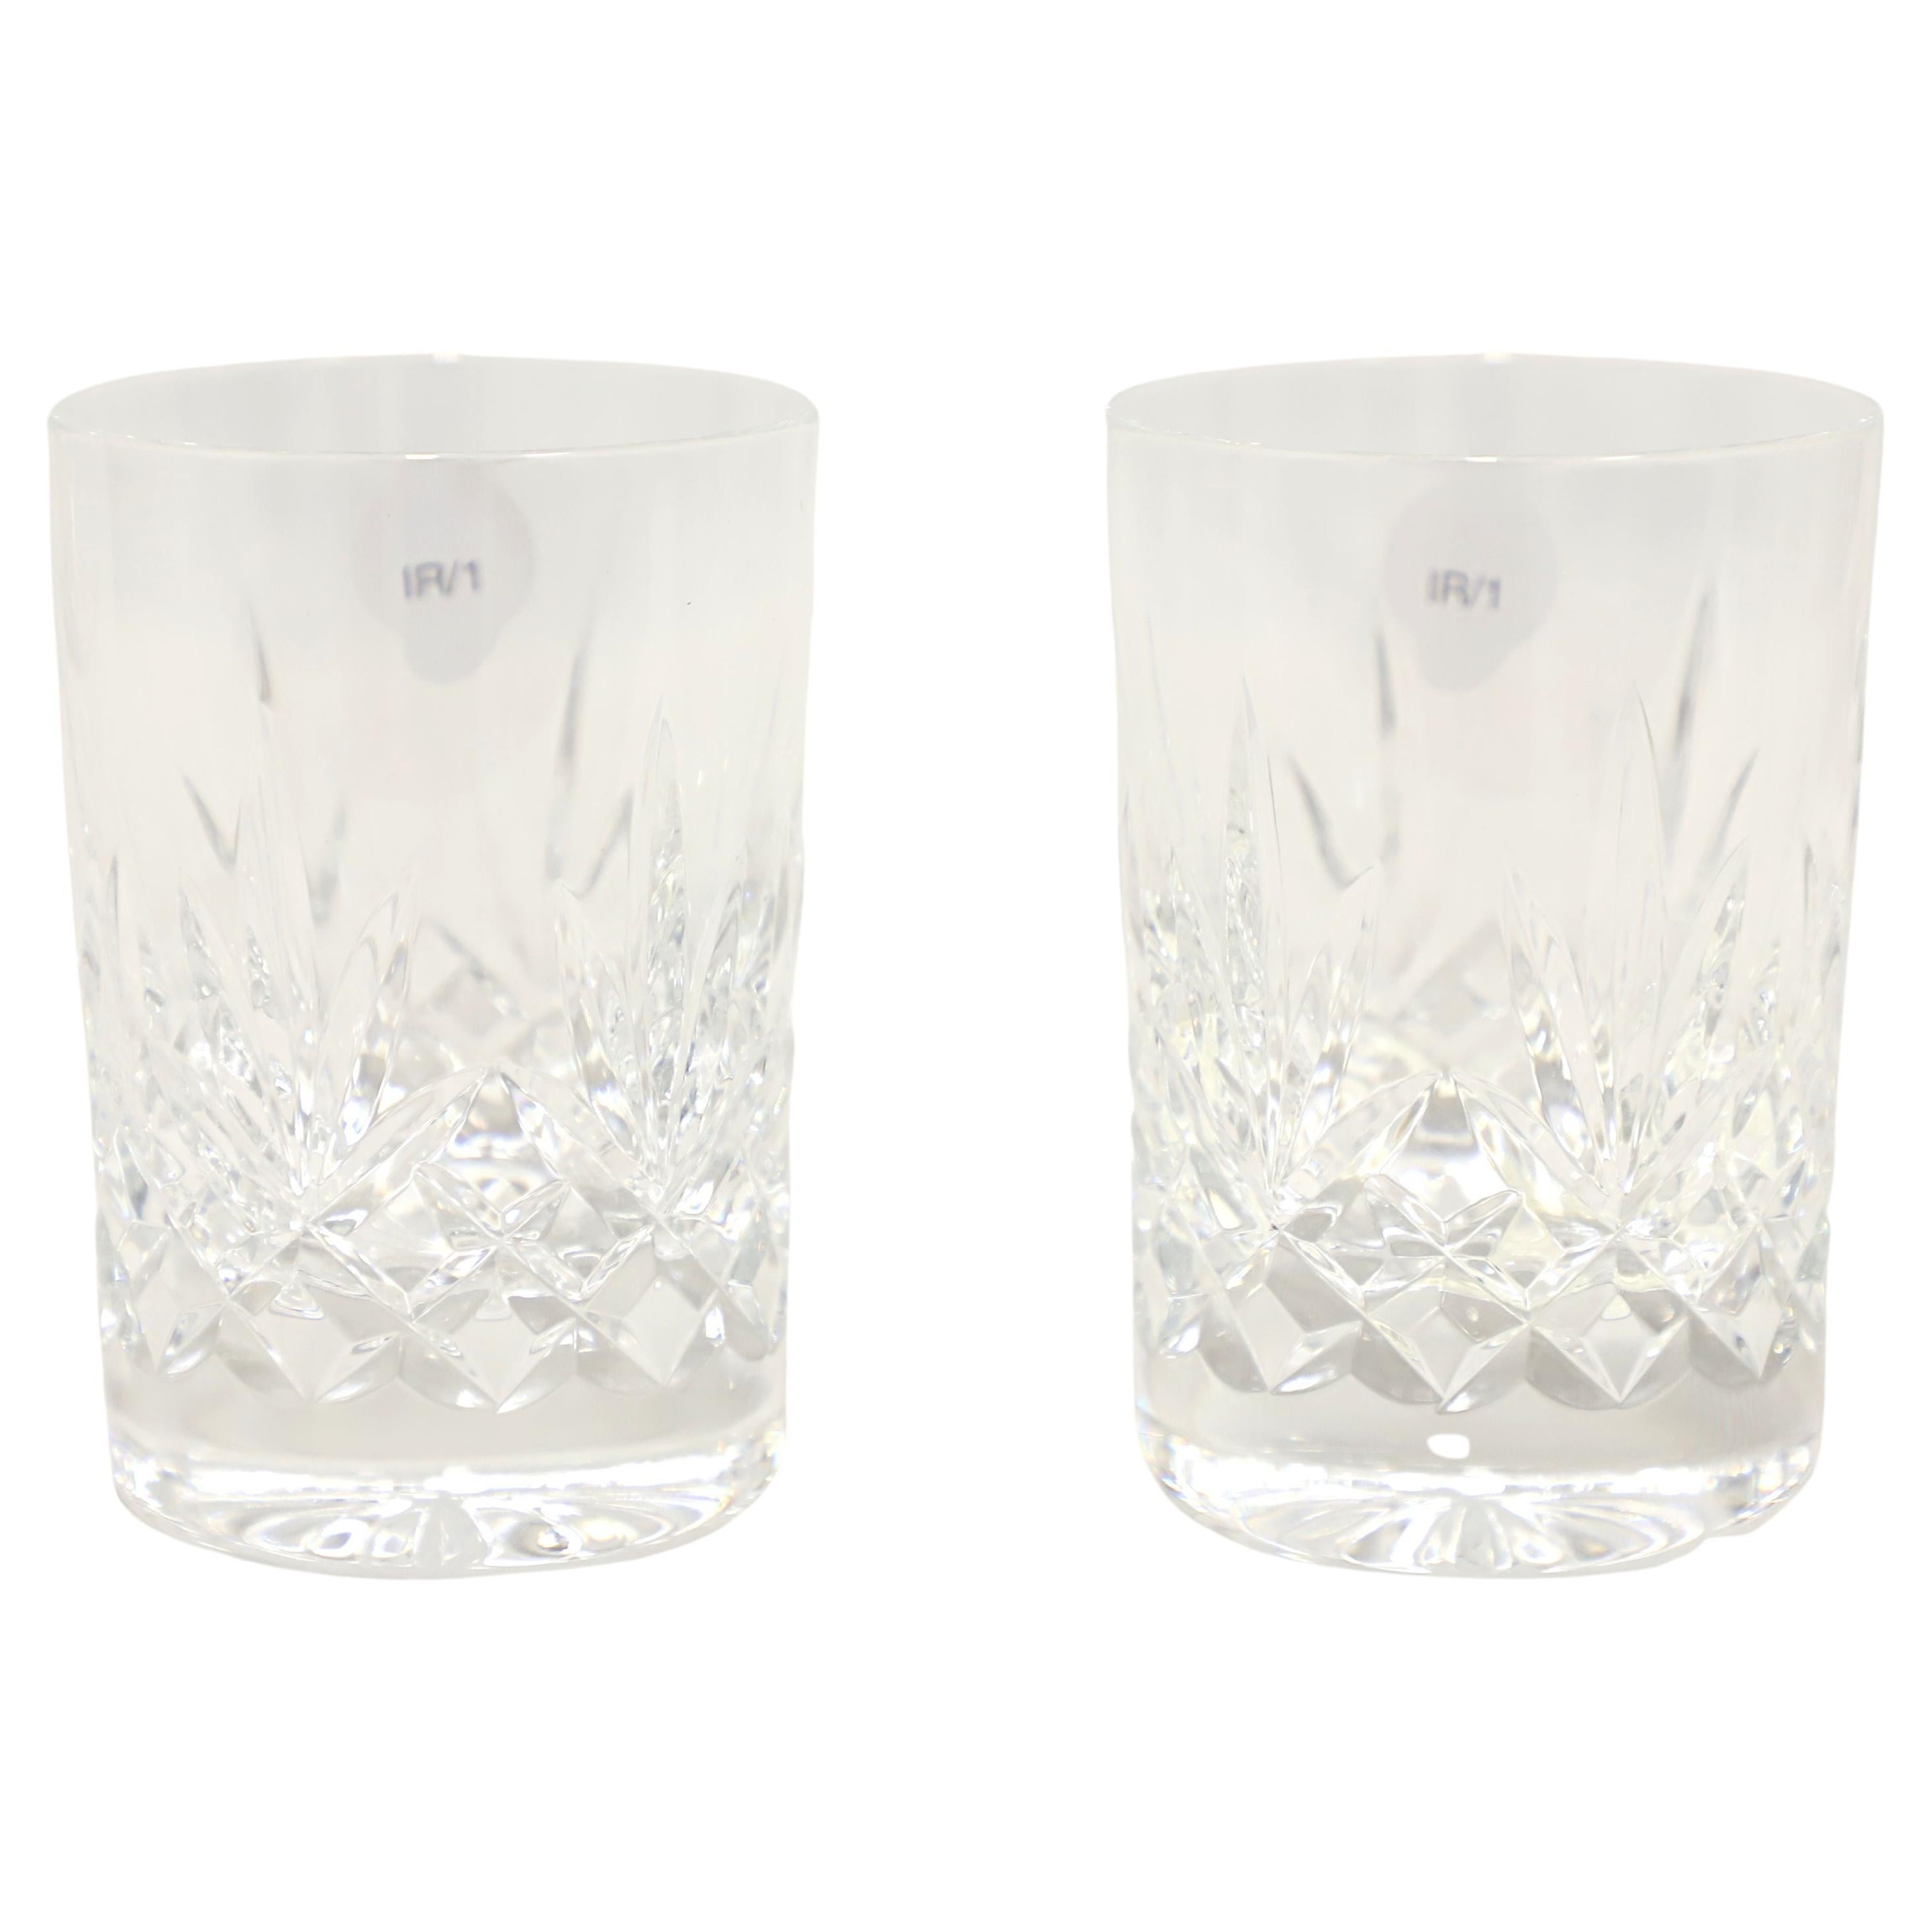 WATERFORD Crystal Ireland 4" Ferndale Juice Tumbler - Pair A *New in Open Box*